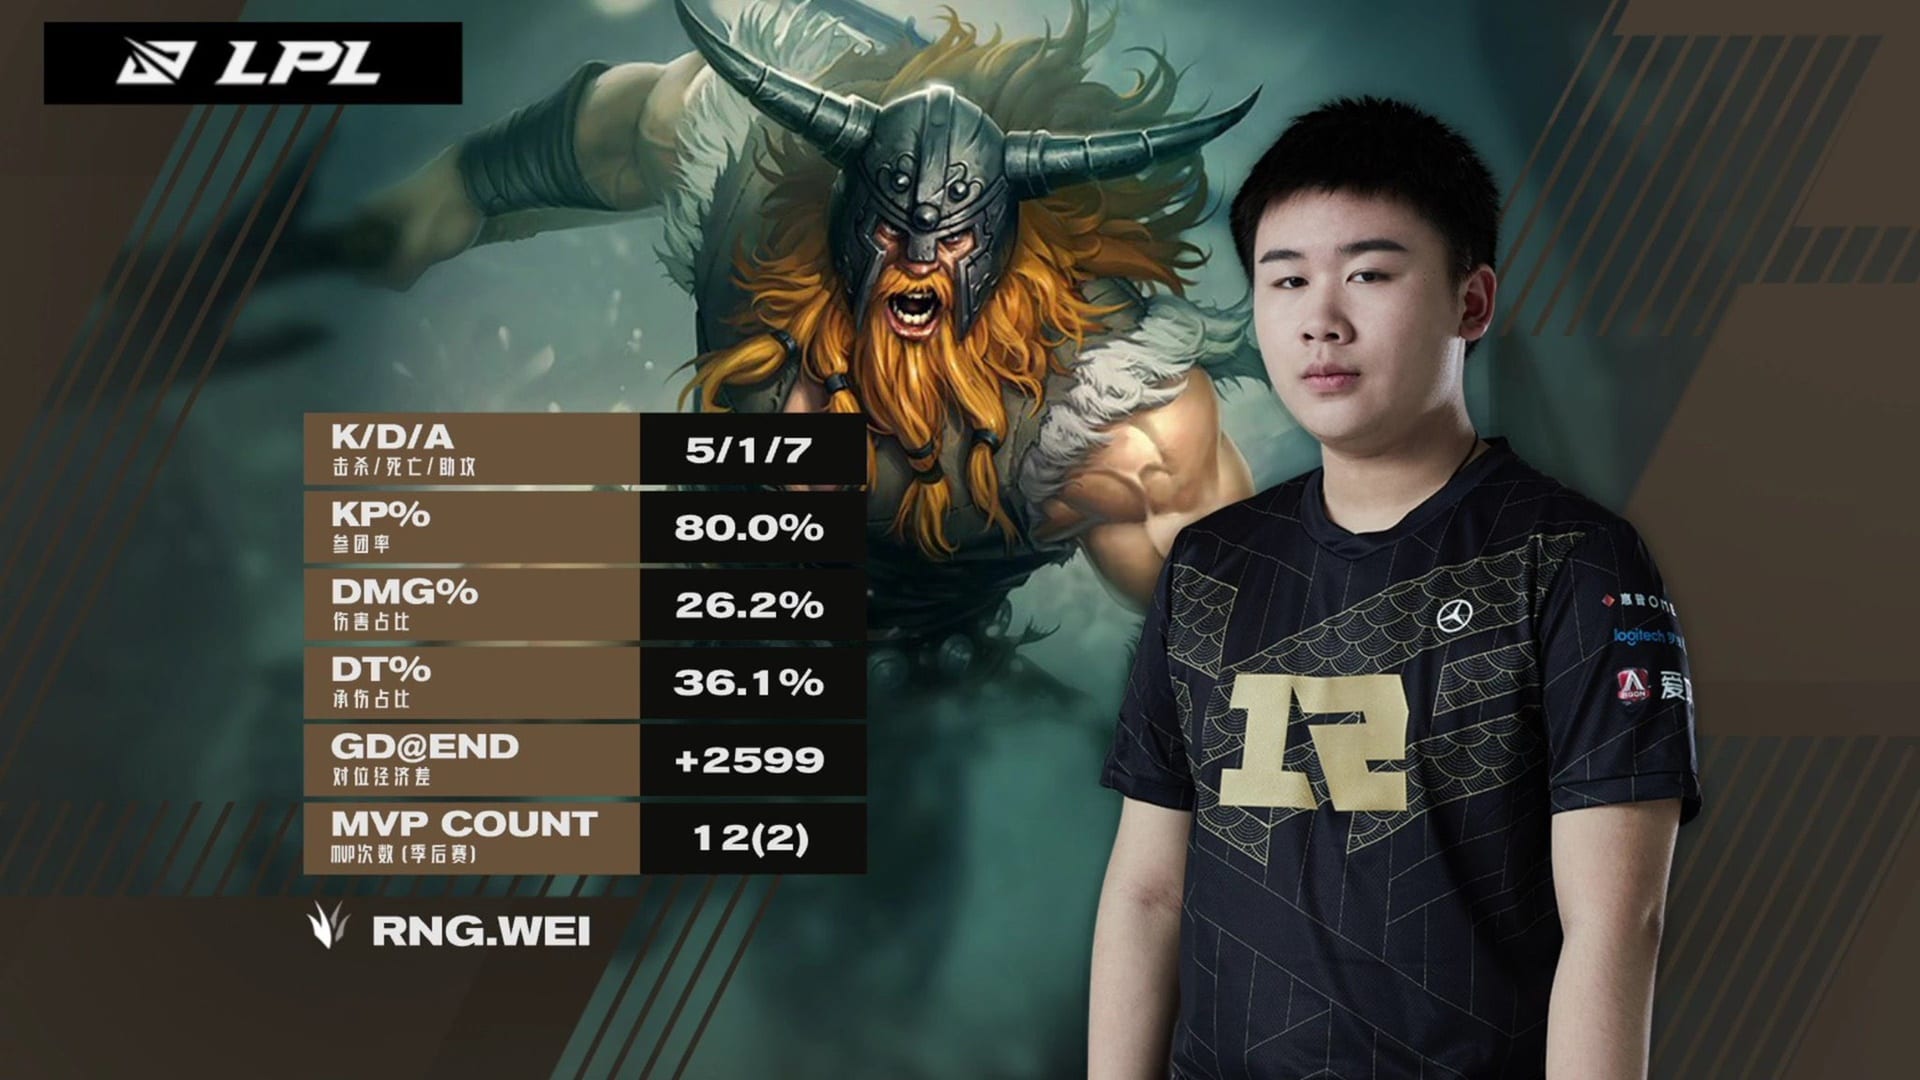 Wei is among the best 5 MSI junglers